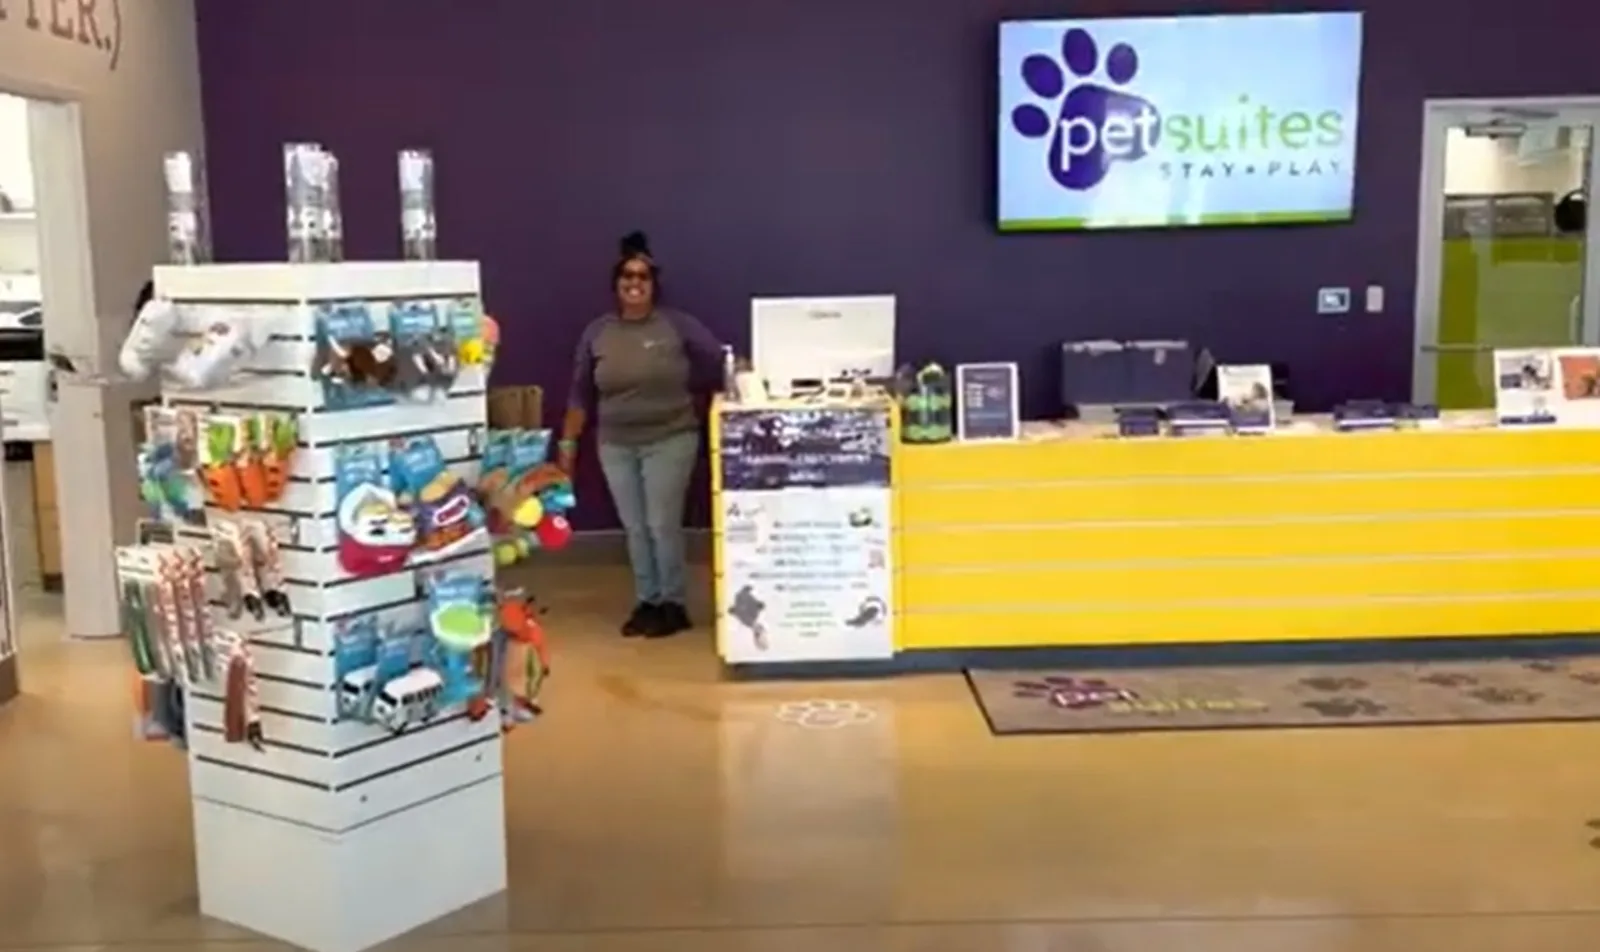 PetSuites Sugarland lobby full of toys and friendly staff